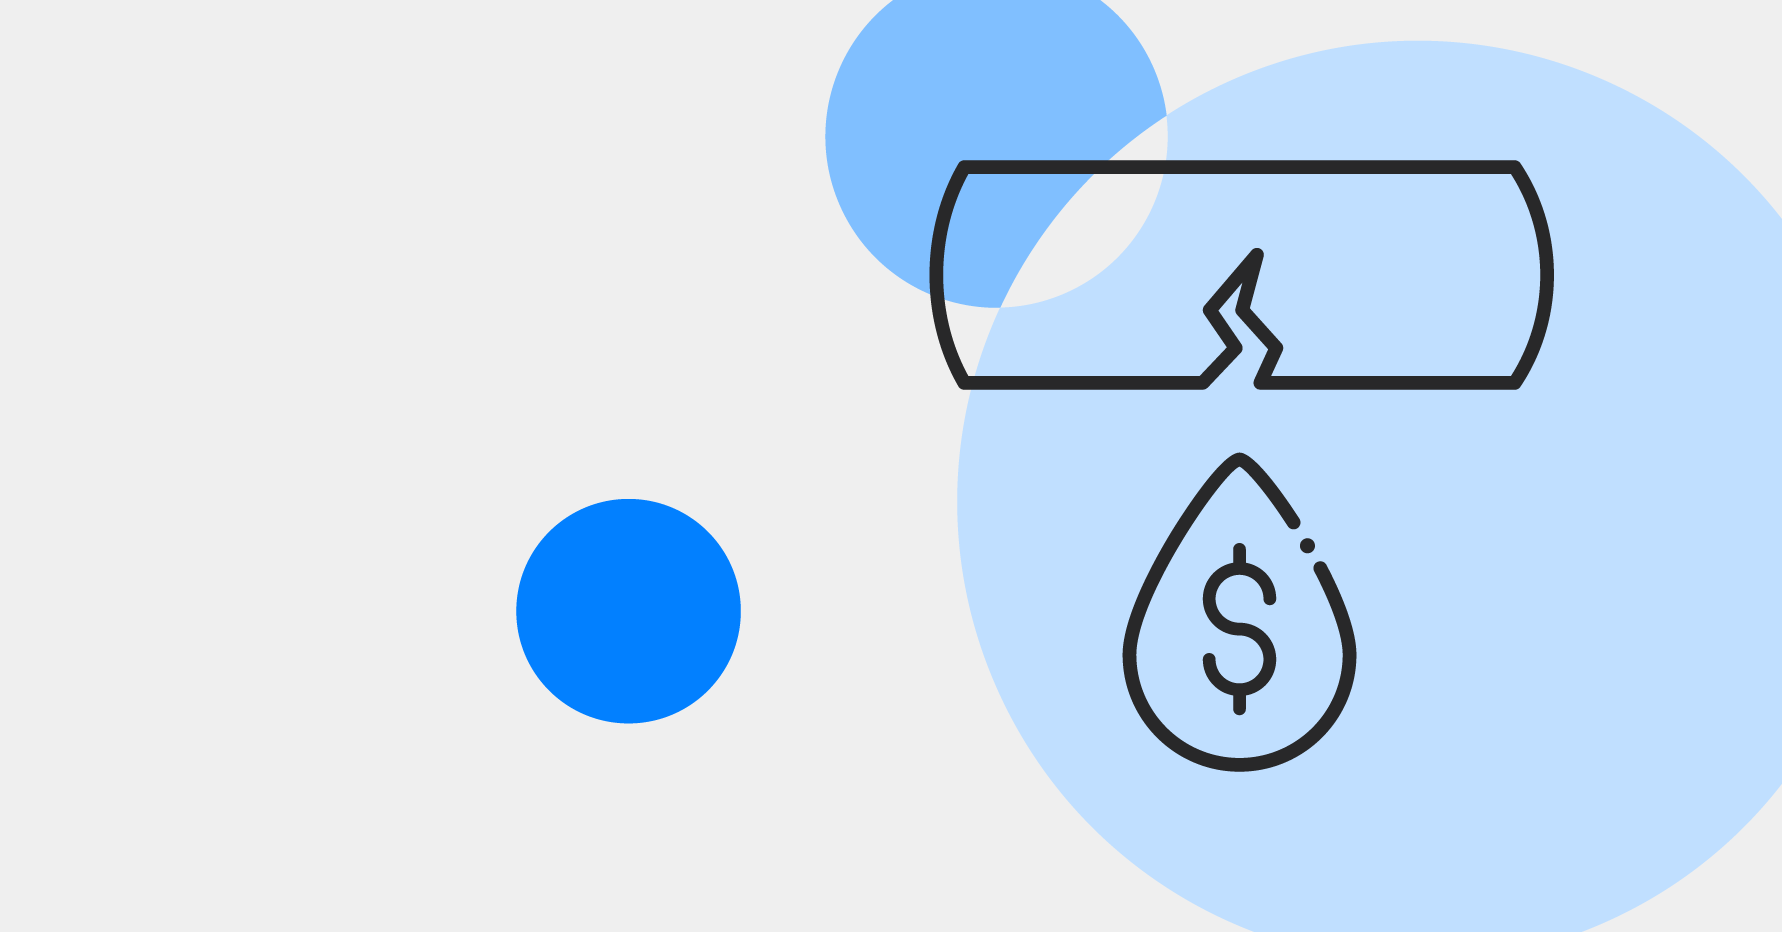 Stylistic illustration of a broken pipe leaking a drop of liquid with a dollar sign on it